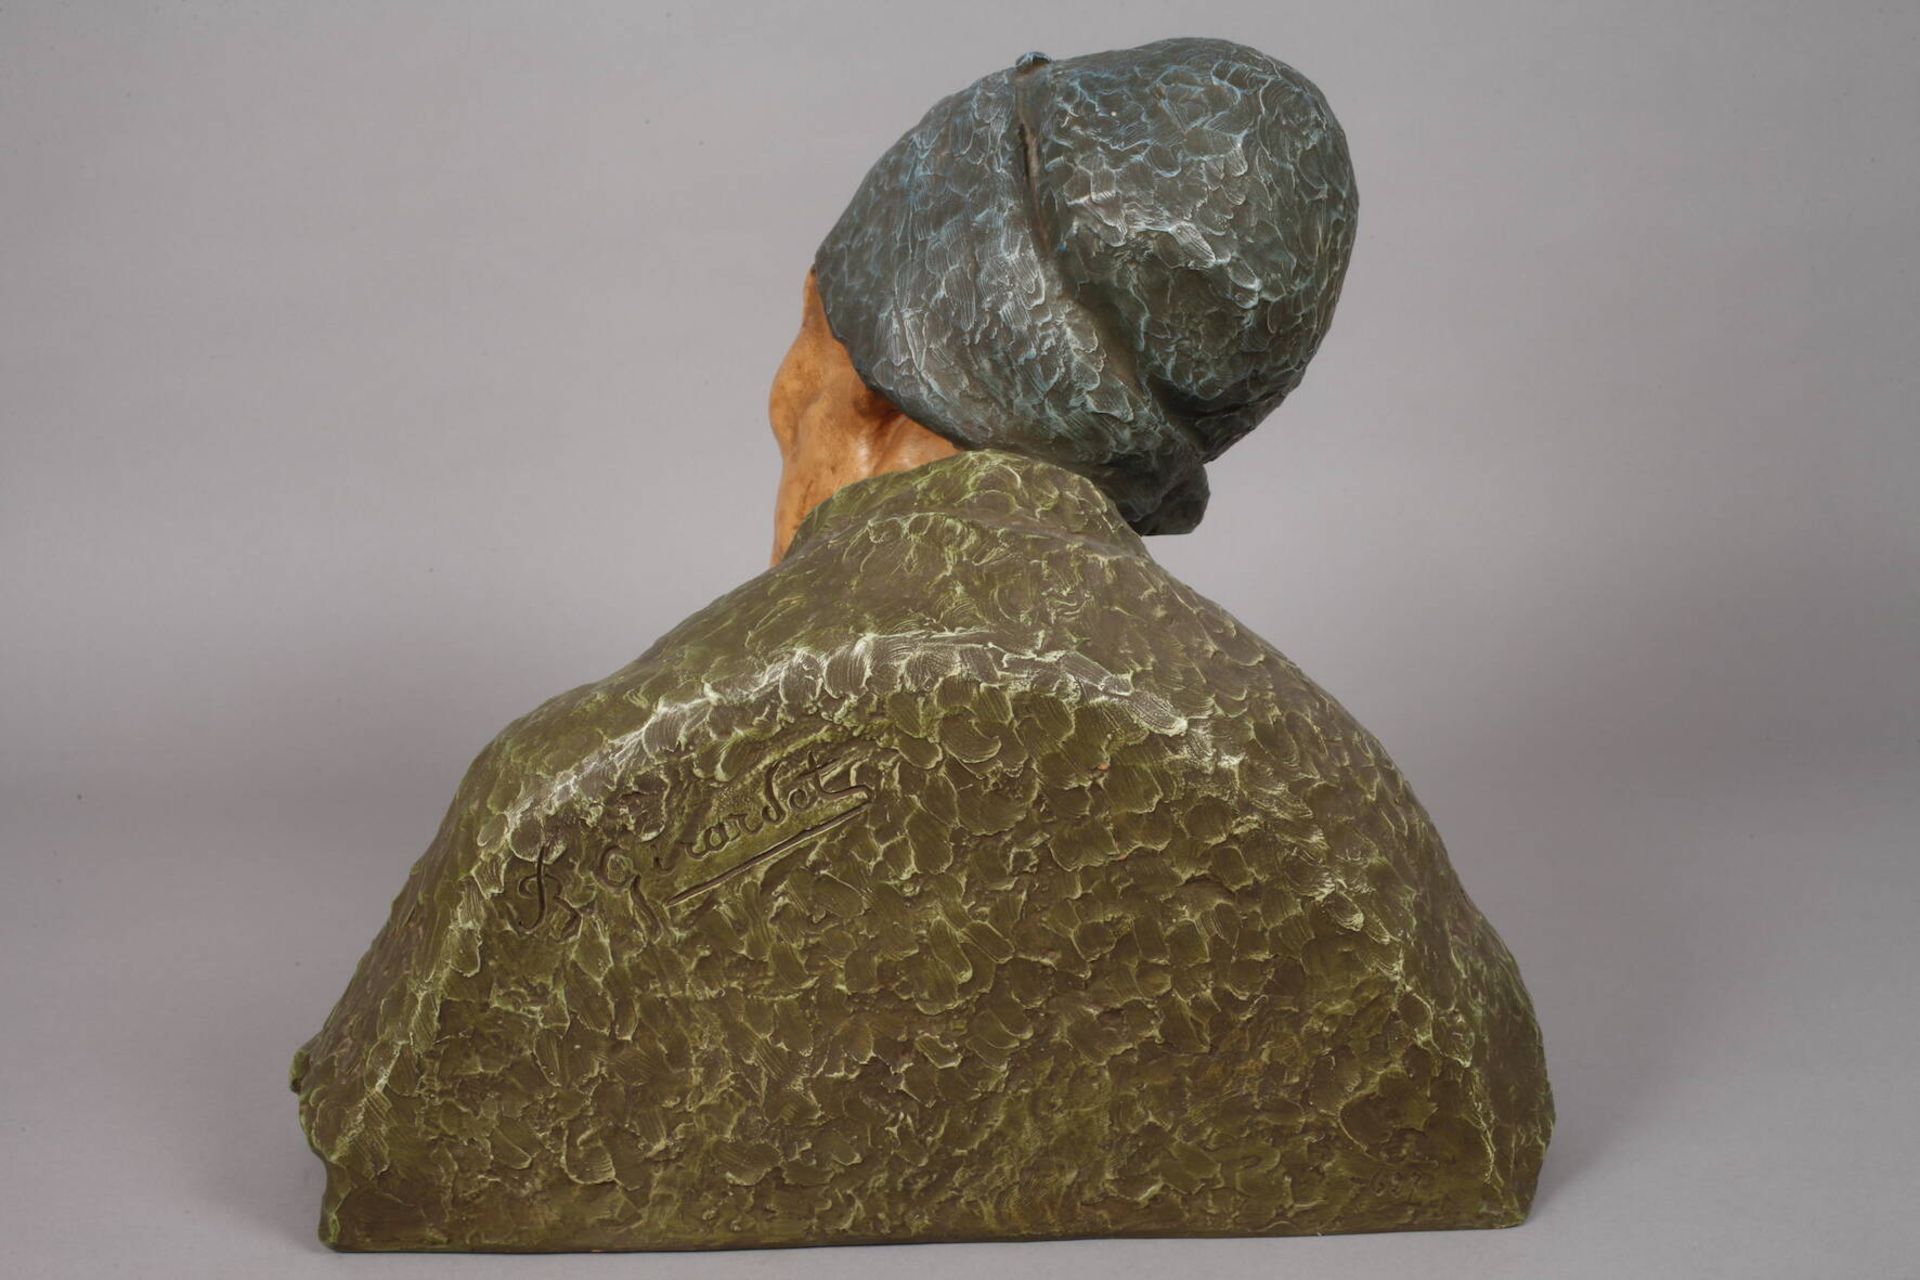 Berthe Girardet terracotta bust "The Old Woman" - Image 4 of 9